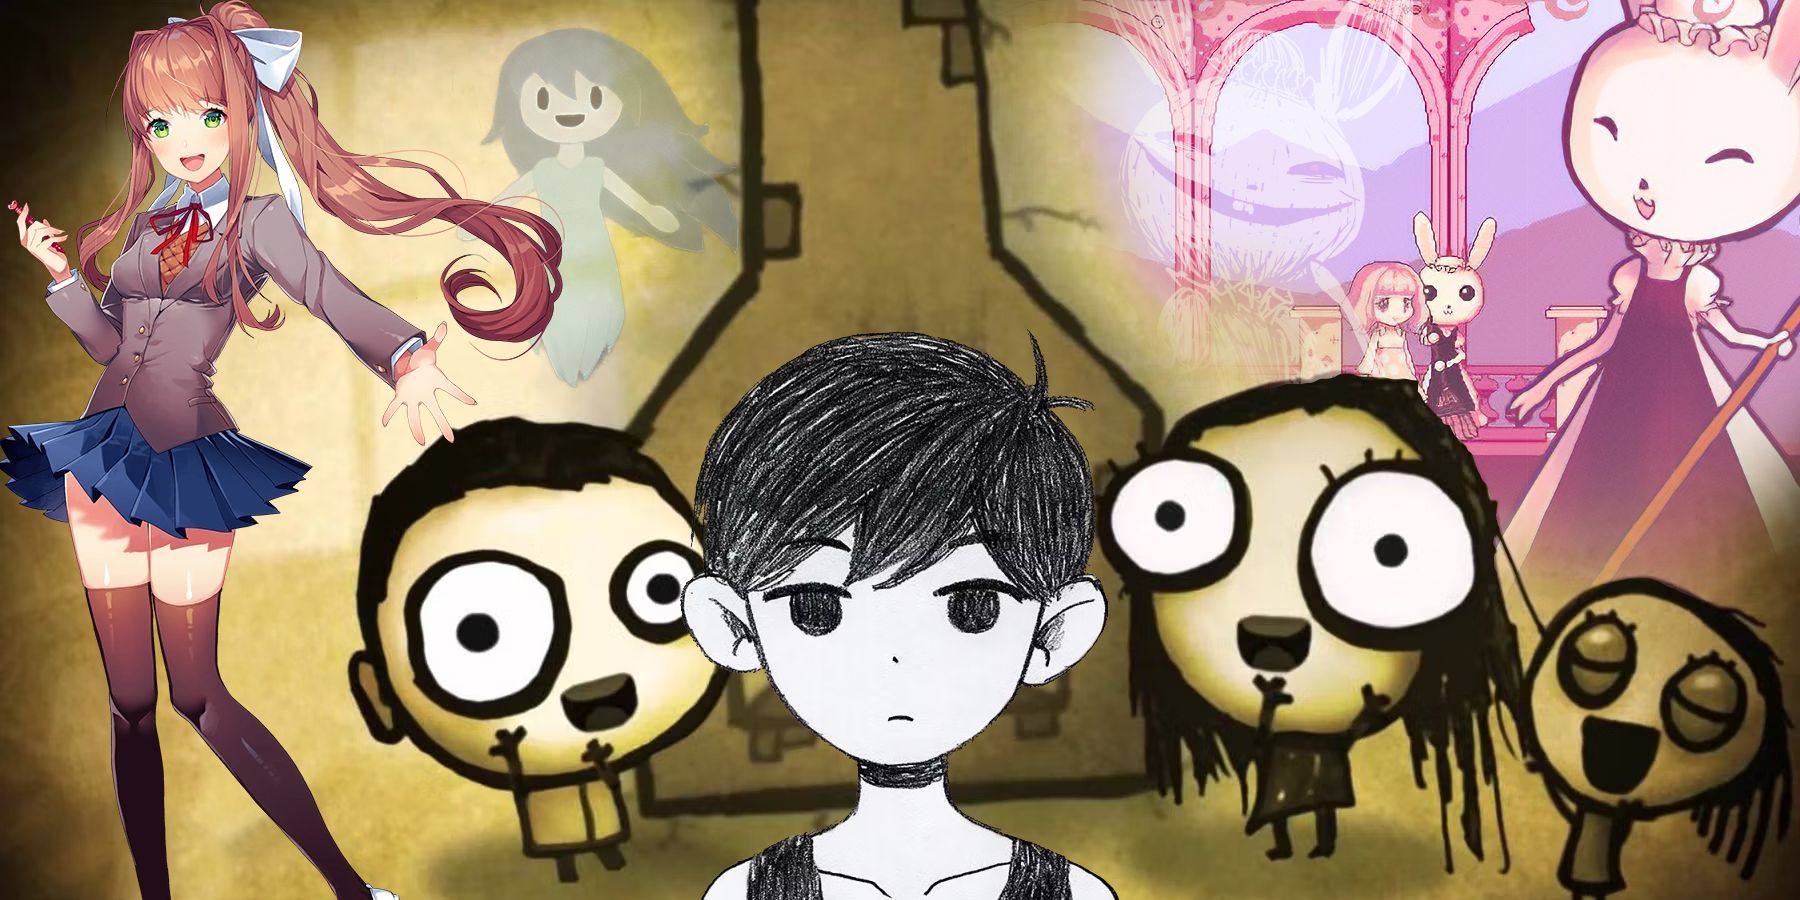 Omori joins Xbox Game Pass as surprise addition